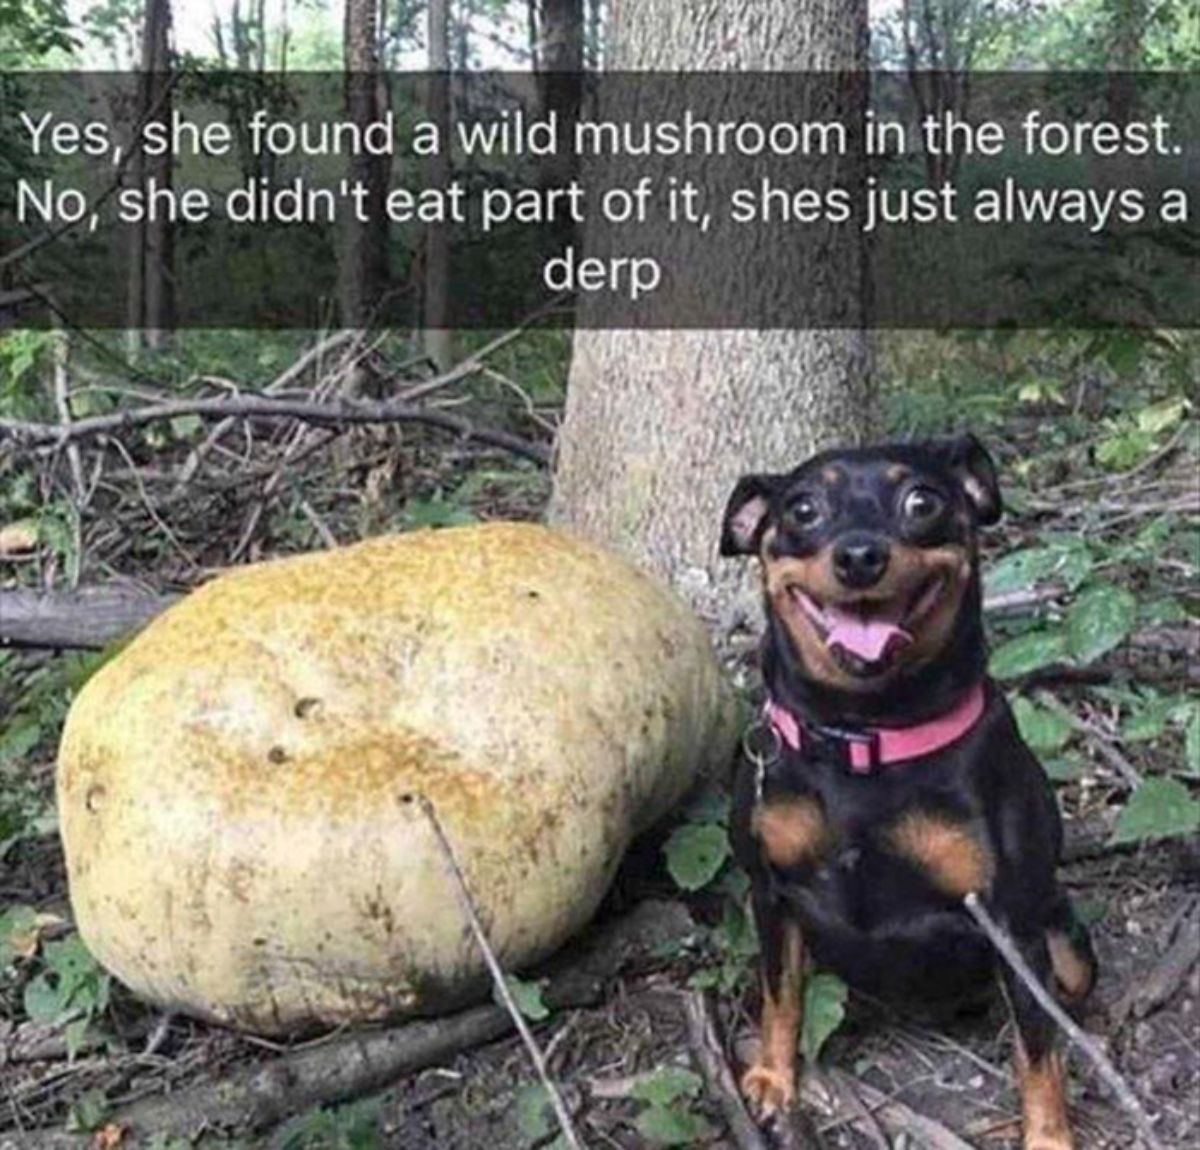 black and brown dog next to a large mushroom with the caption Yes, she found a wild mushroom in the forest. No, she didn't eat part of it, shes just always a derp